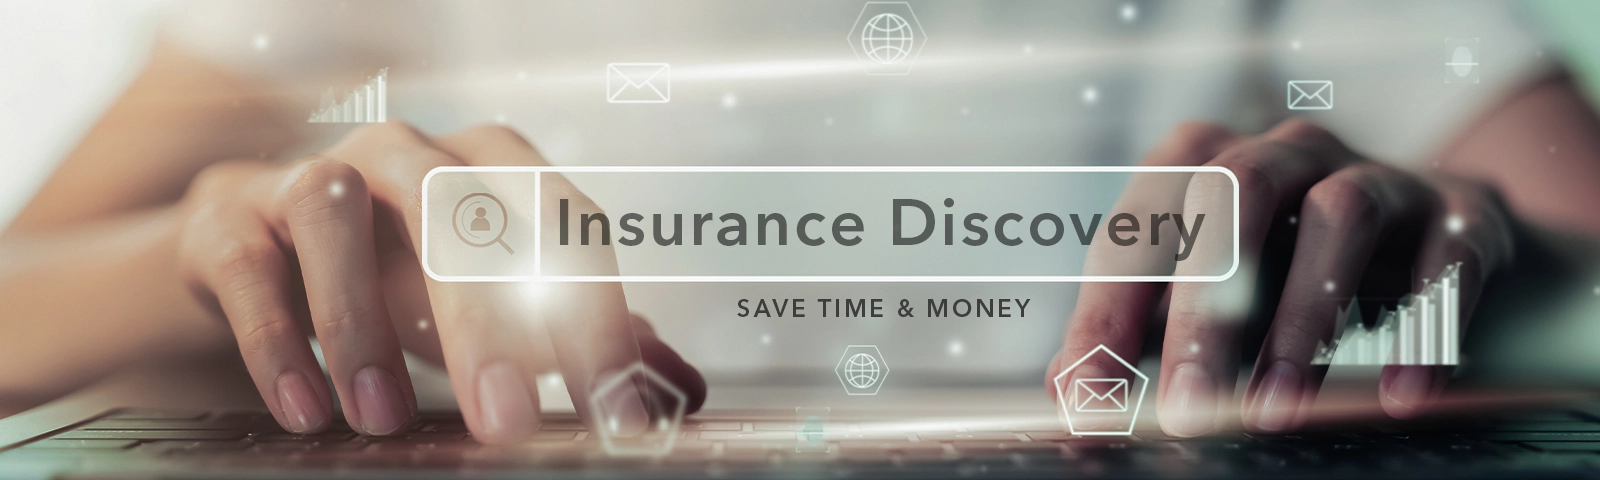 Real-Time Insurance Discovery